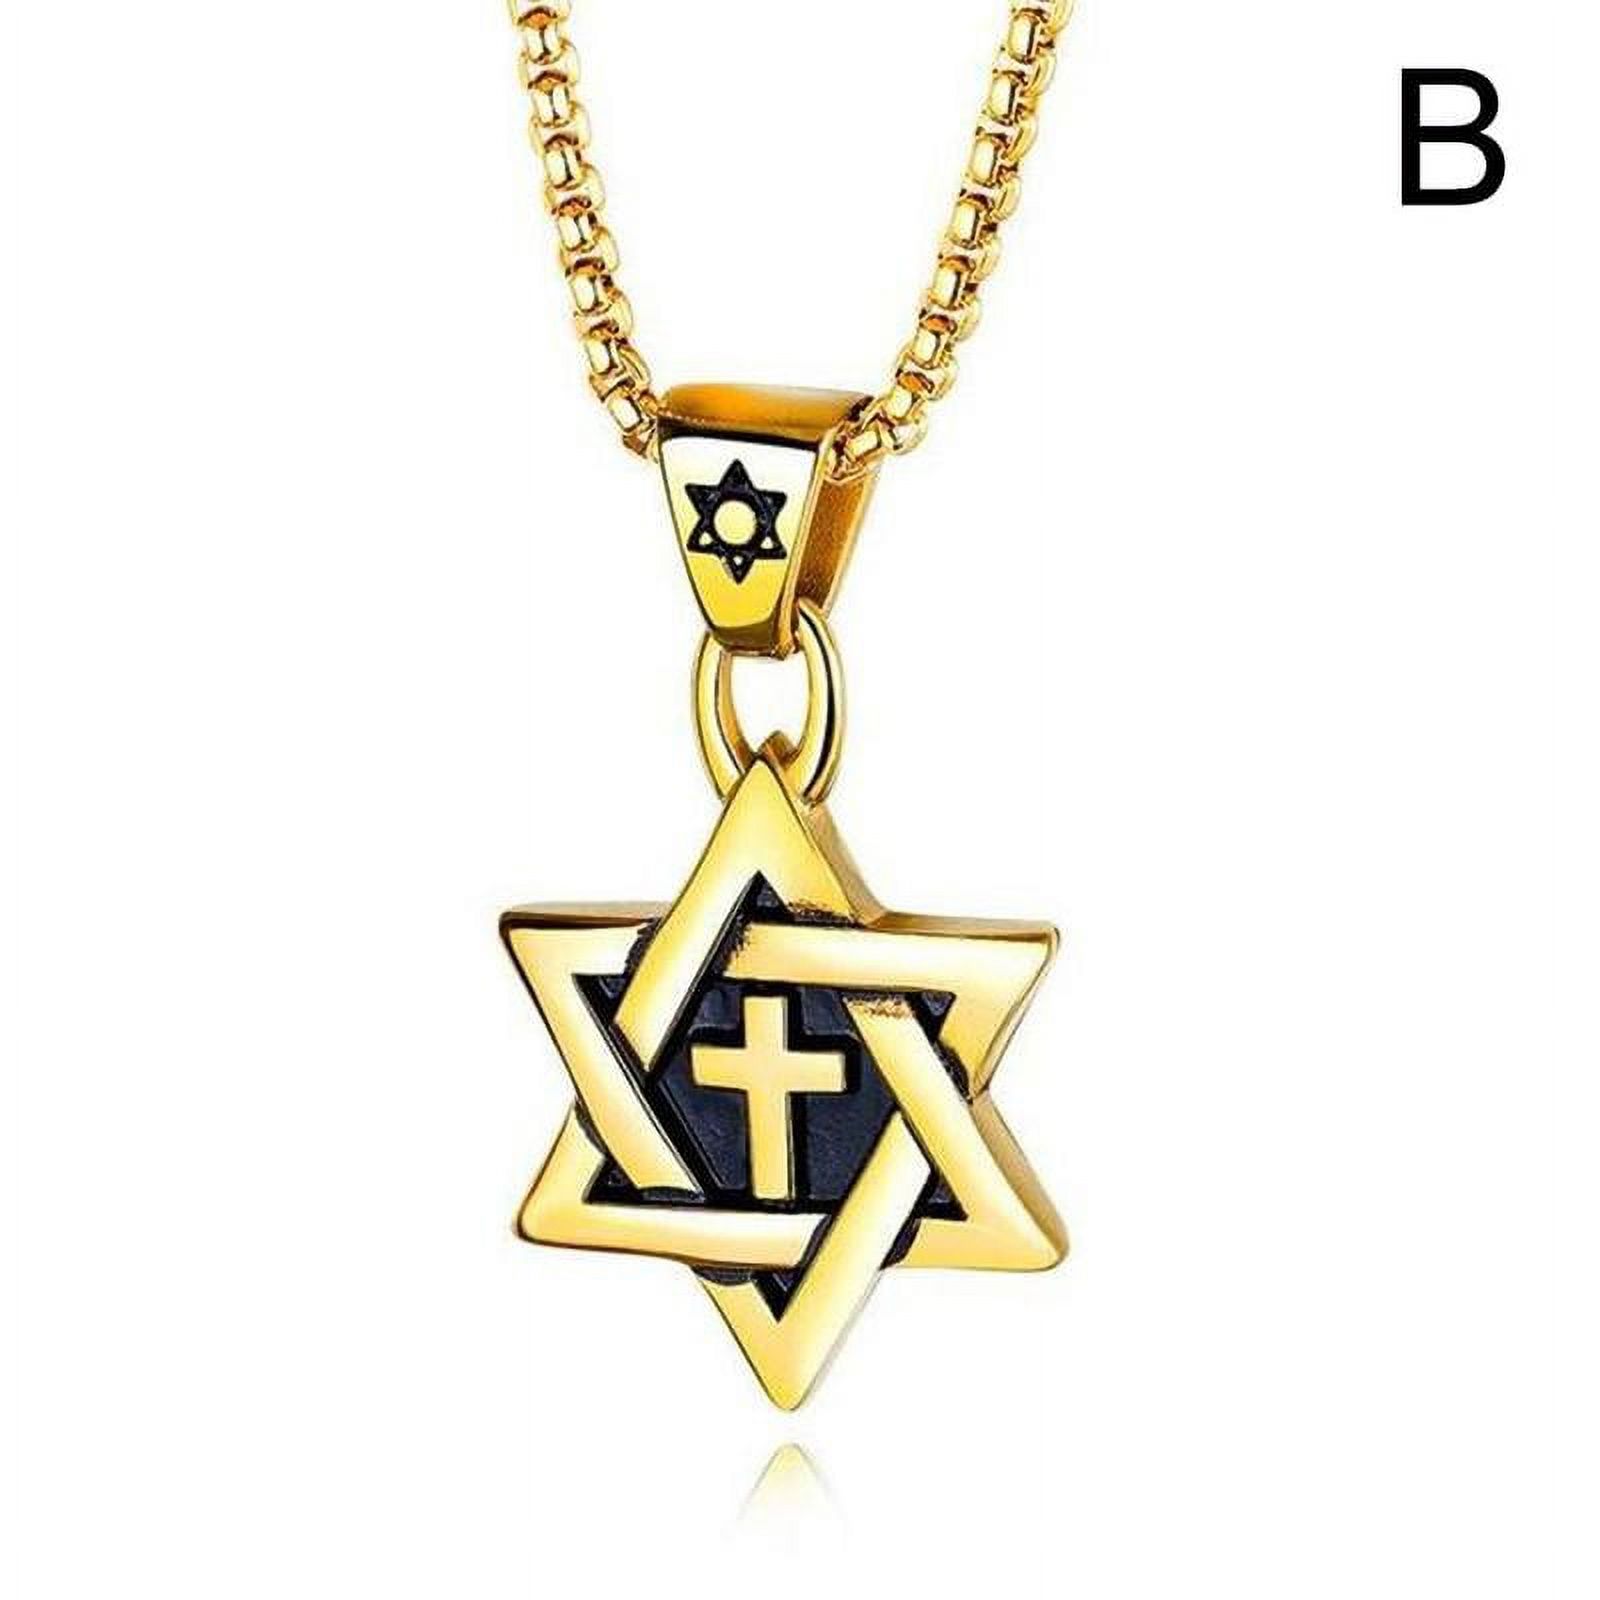 Stainless Steel Star Cross Pendant & Necklace Gold Color Women/Men Chain Israel Jewish Jewelry For Men - image 1 of 1